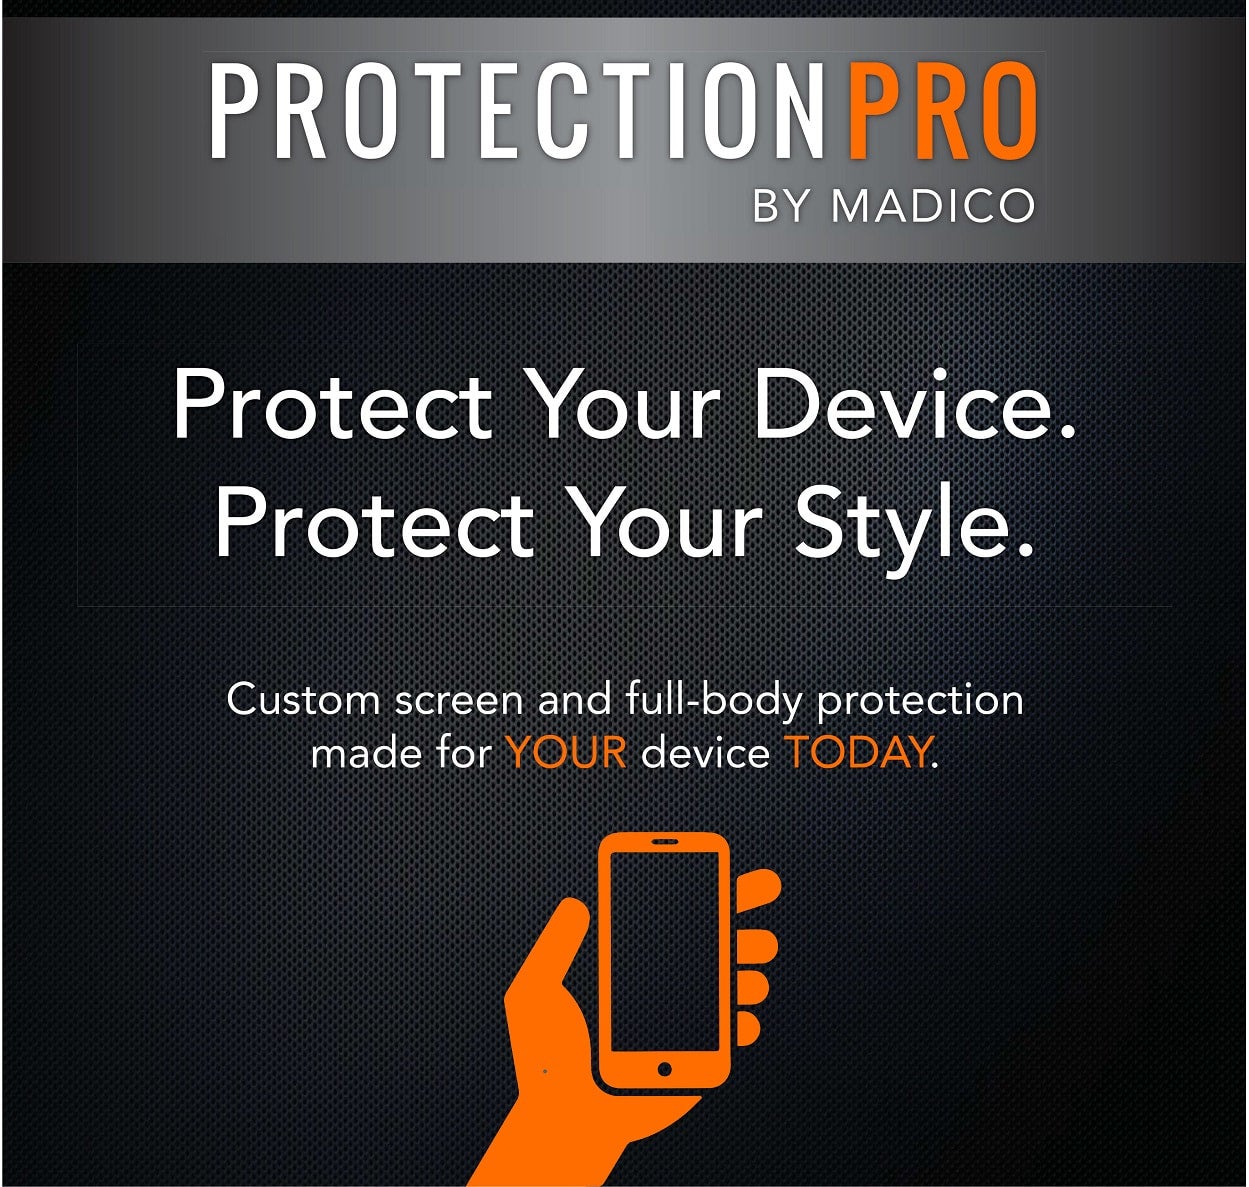 ProtectionPro® by Madico® Cut-on-Demand Device Protection